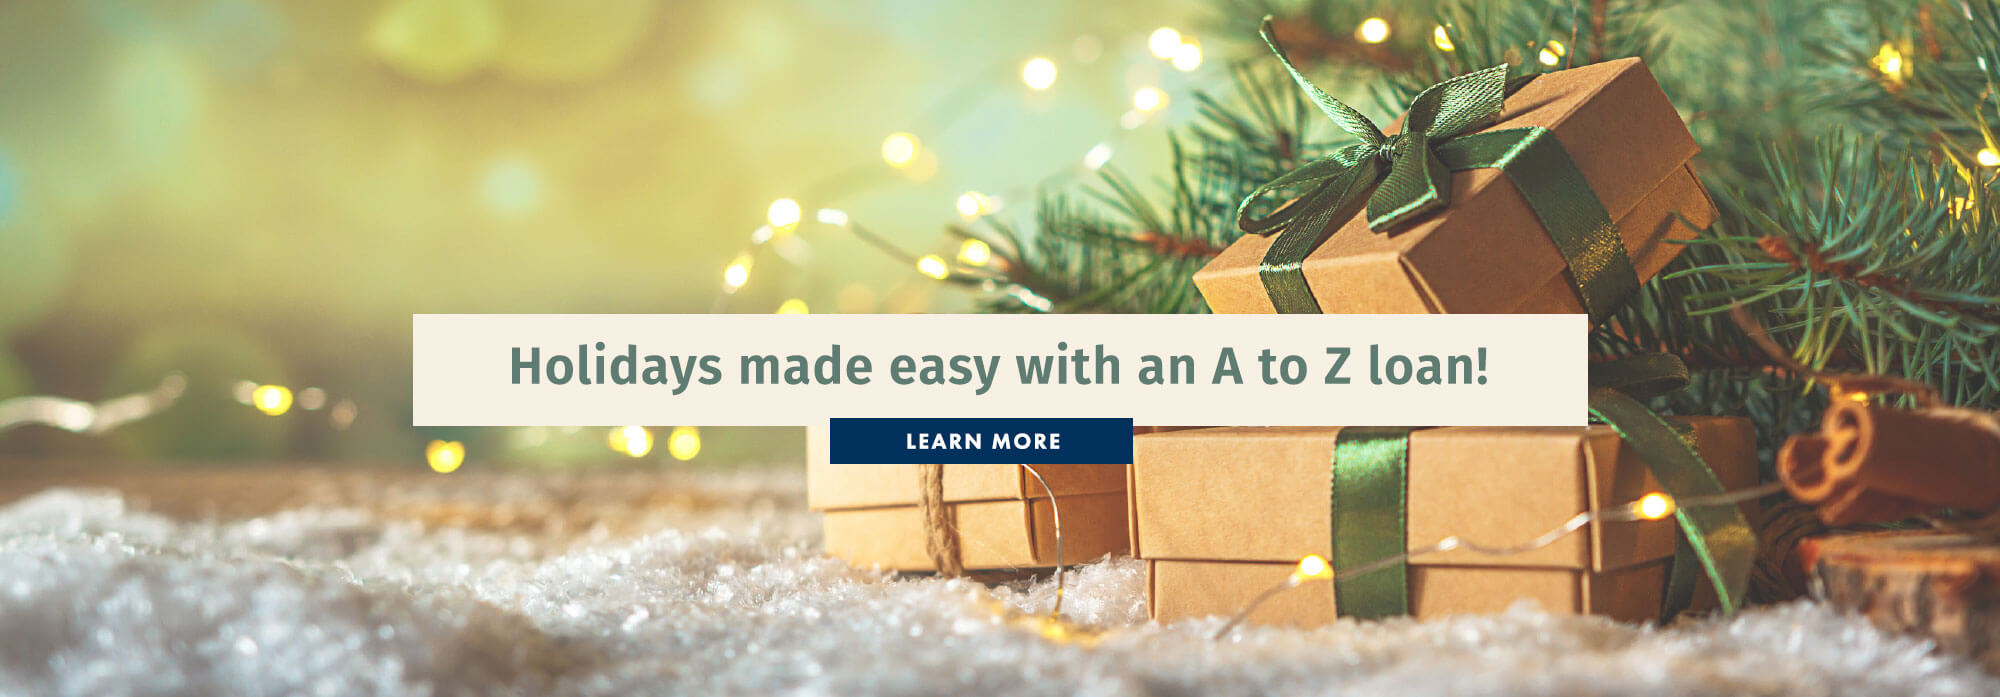 Holidays made easy with an A to Z loan!